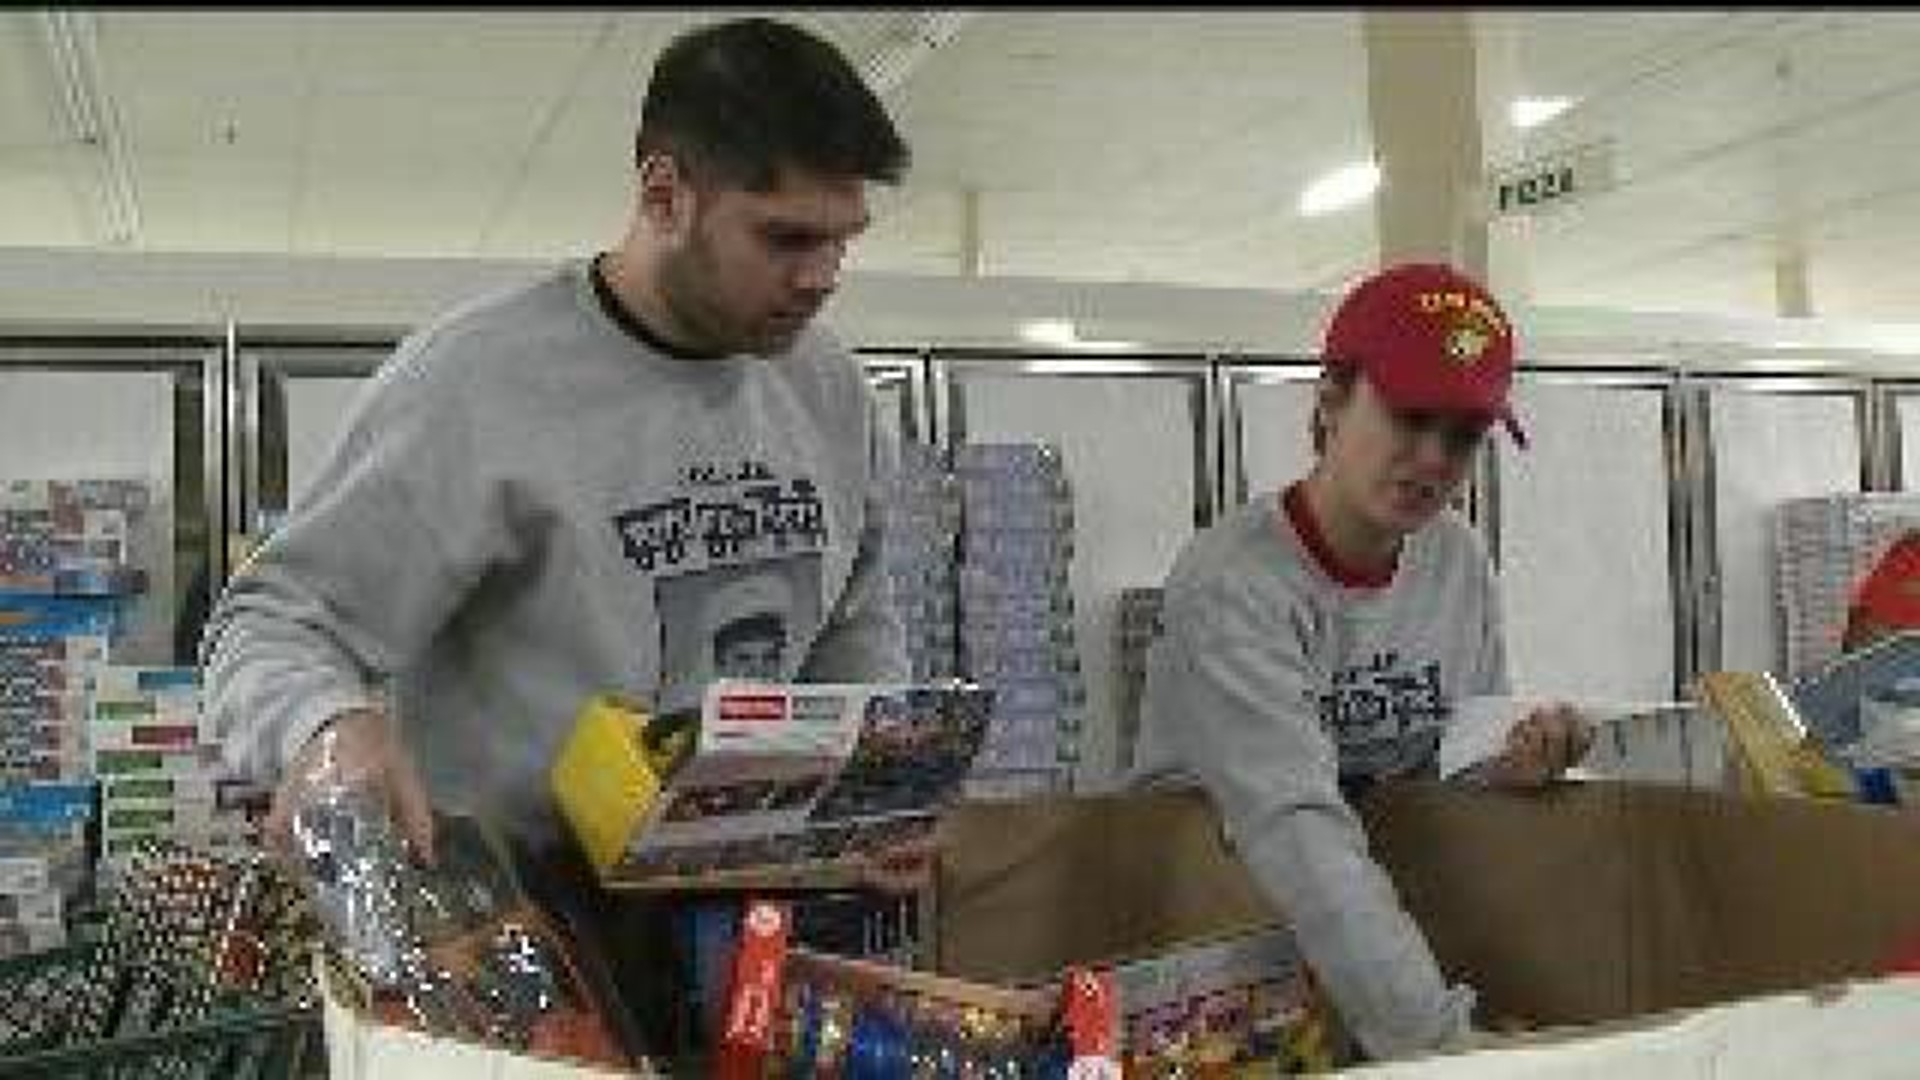 Toys for Tots needs more donations